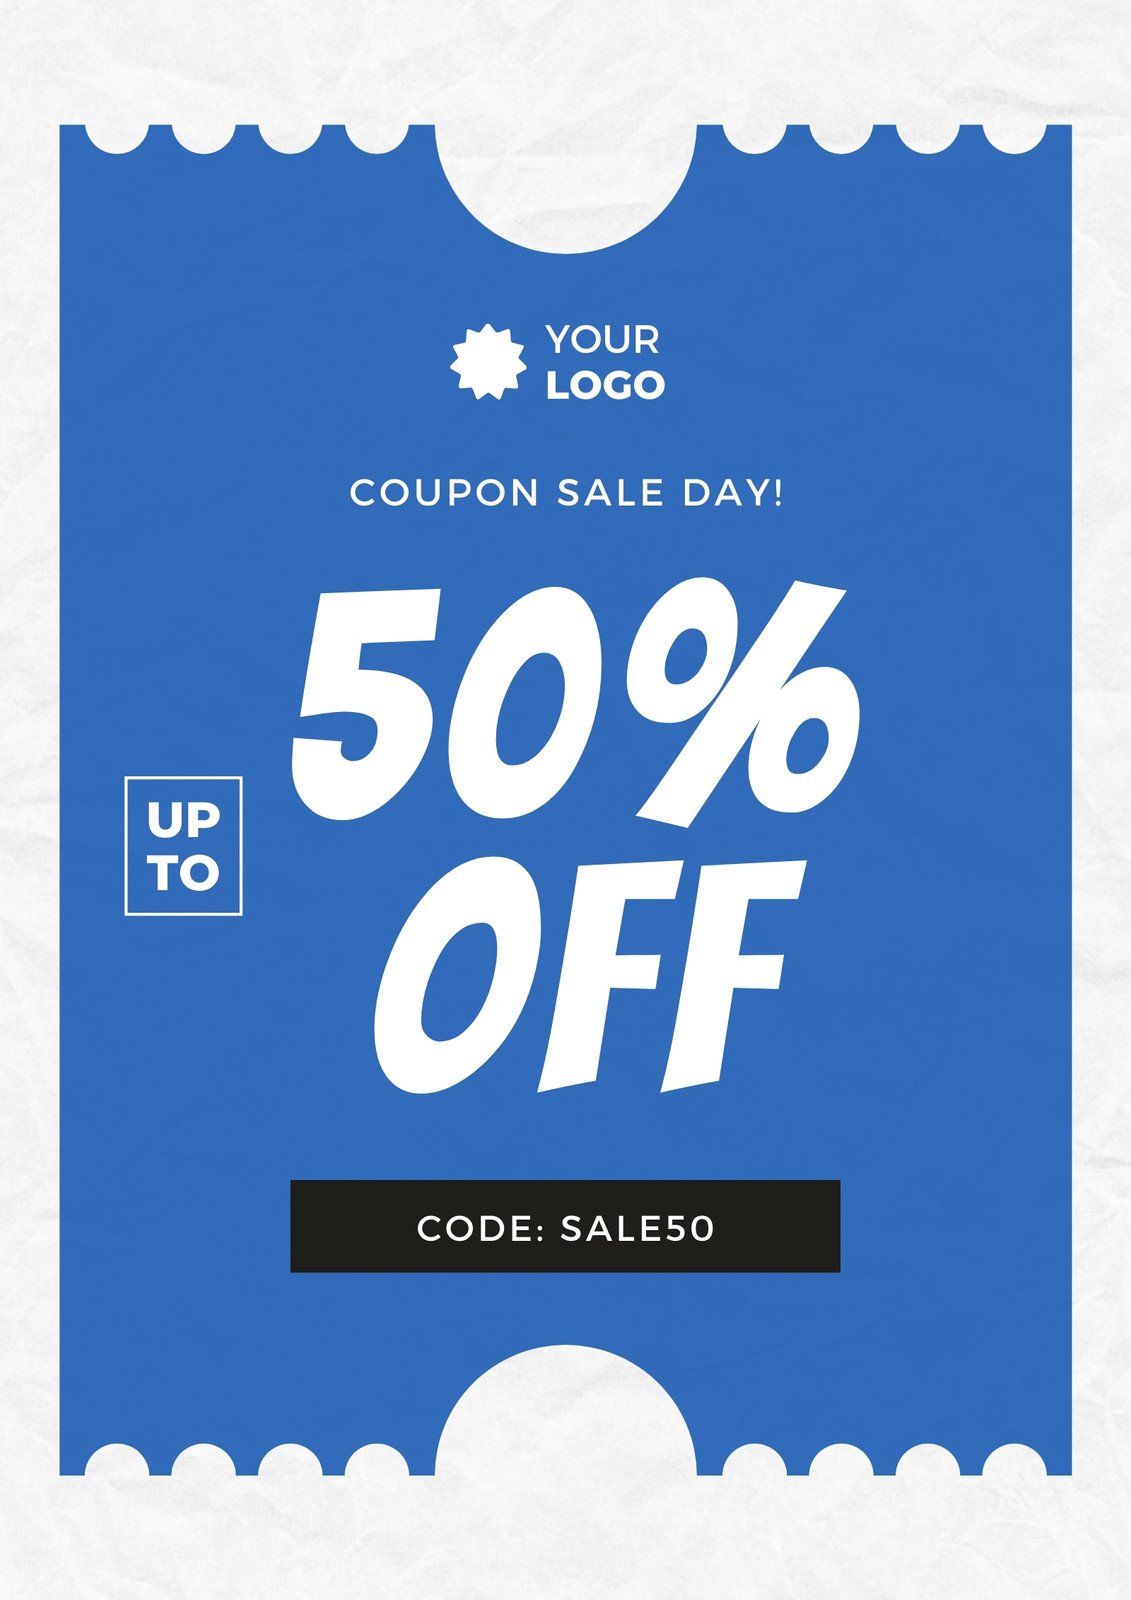 https://marketplace.canva.com/EAFDFKbpKUY/1/0/1131w/canva-blue-white-simple-sale-day-coupon--M8b7wWHwFU.jpg